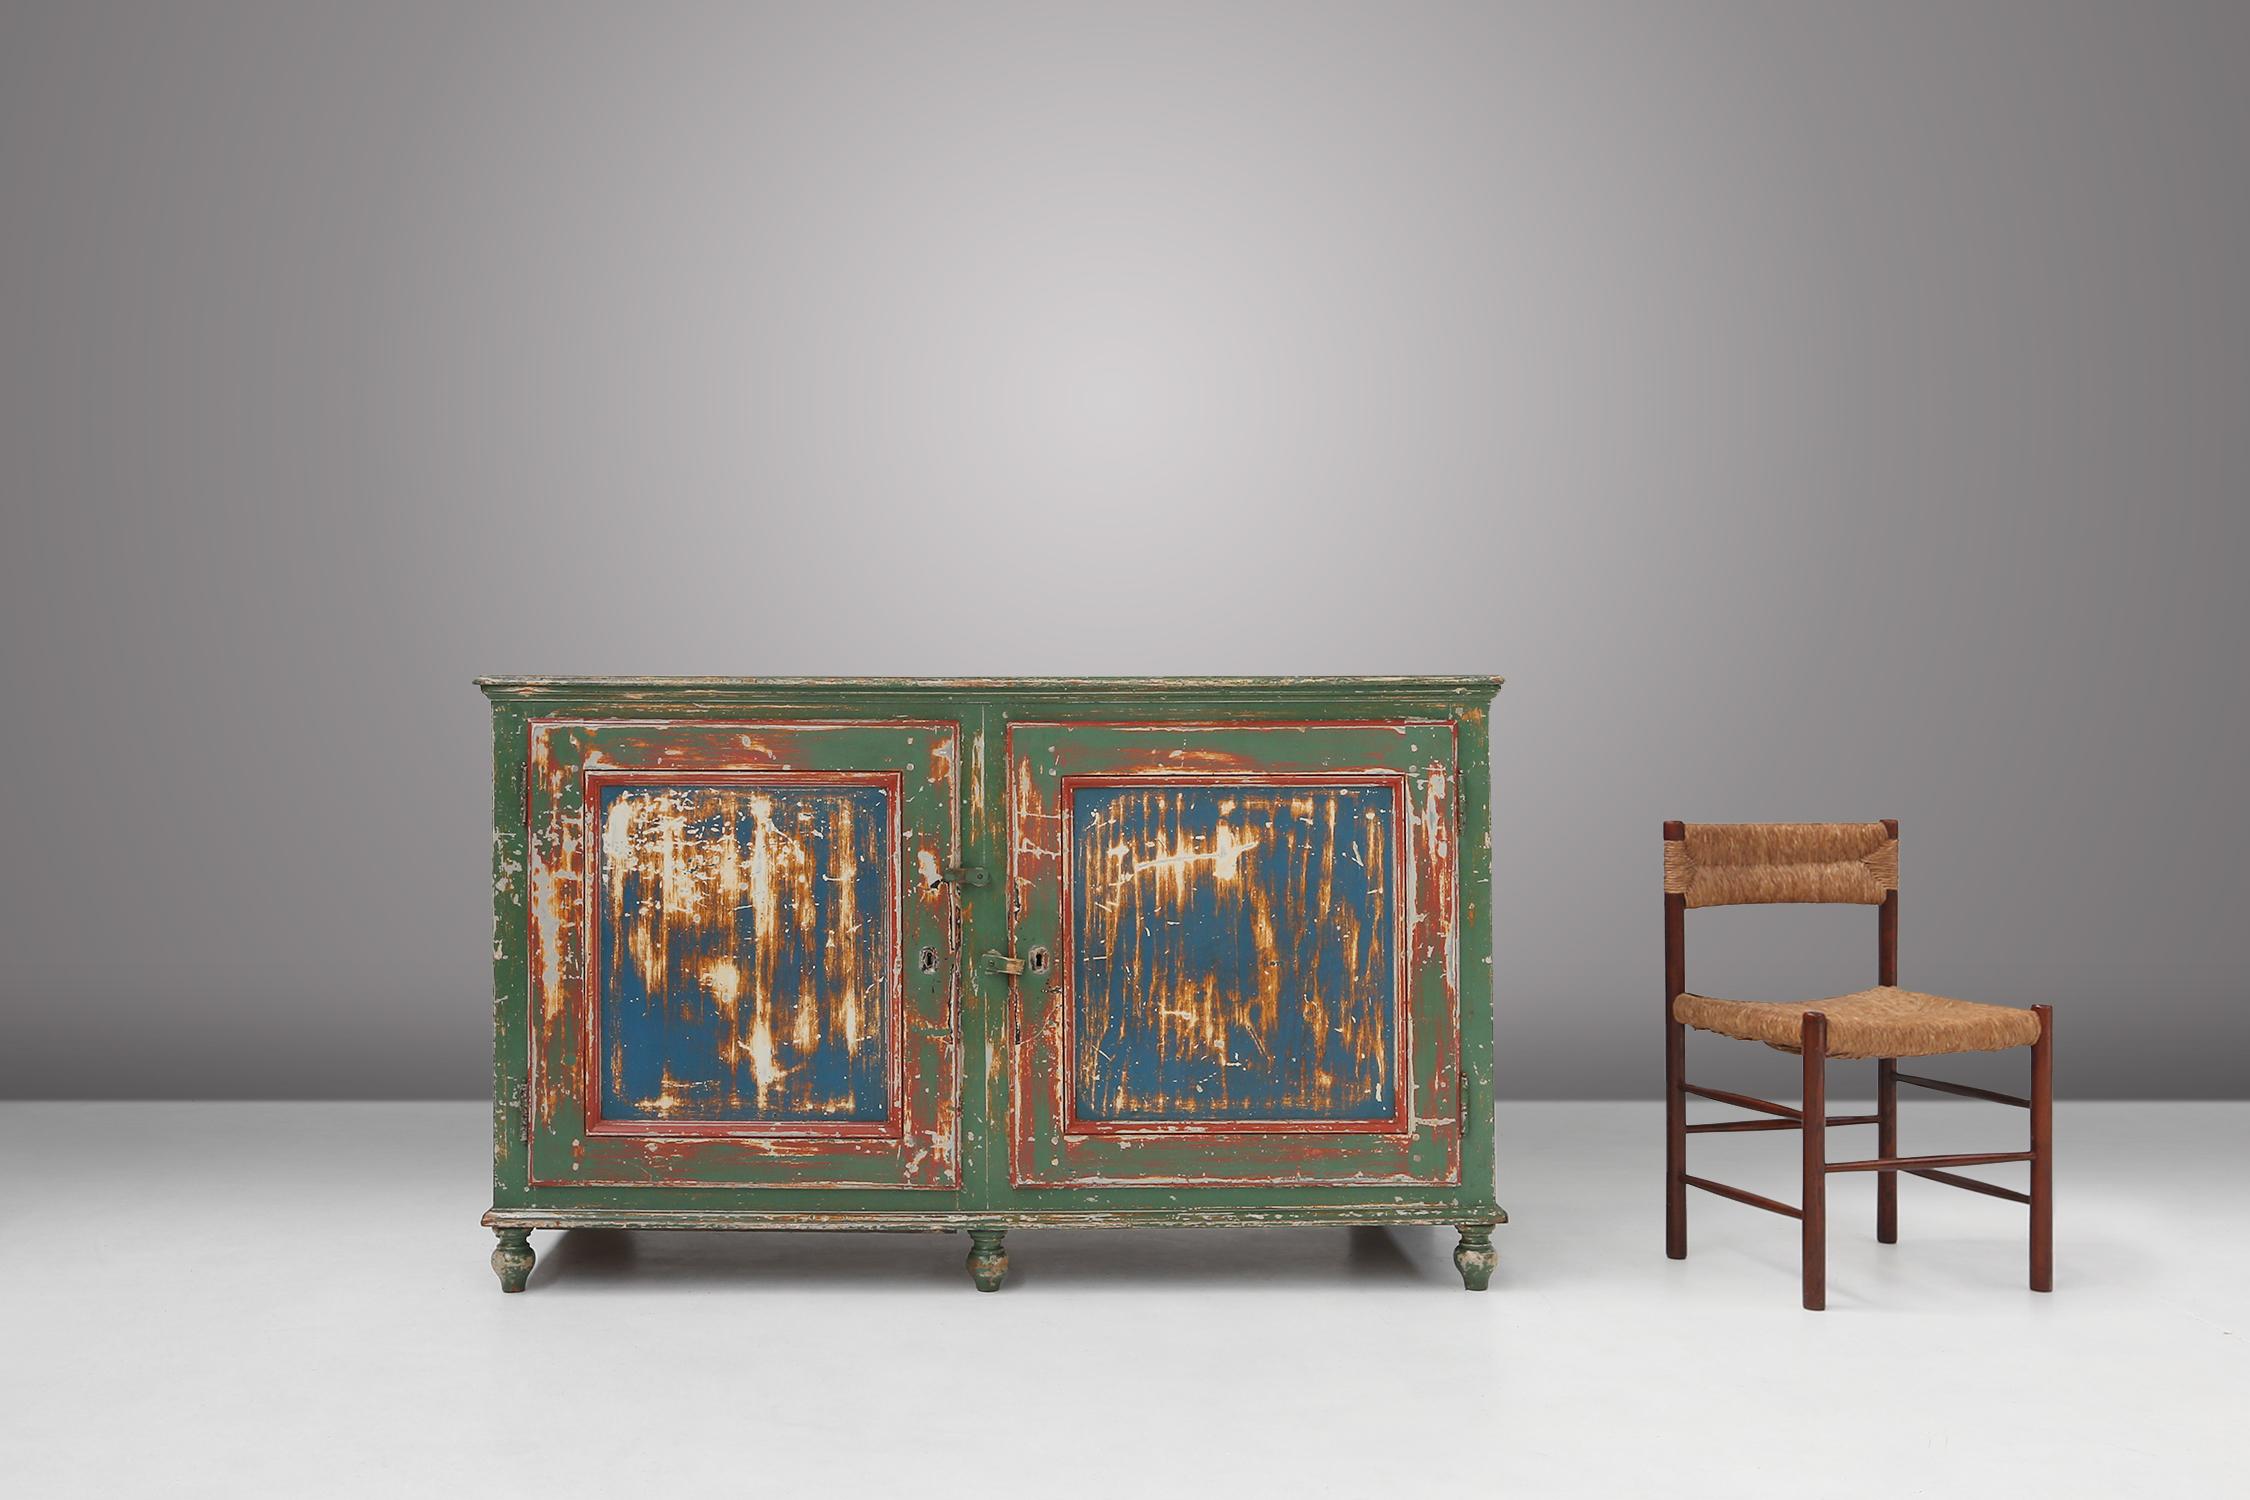 
This cabinet made in the 1920s is painted in a beautiful green with ee, which creates a rustic and cosy atmosphere. The doors are painted blue and red with a weathered finish, which gives the cabinet an authentic and rustic look.

The cabinet has